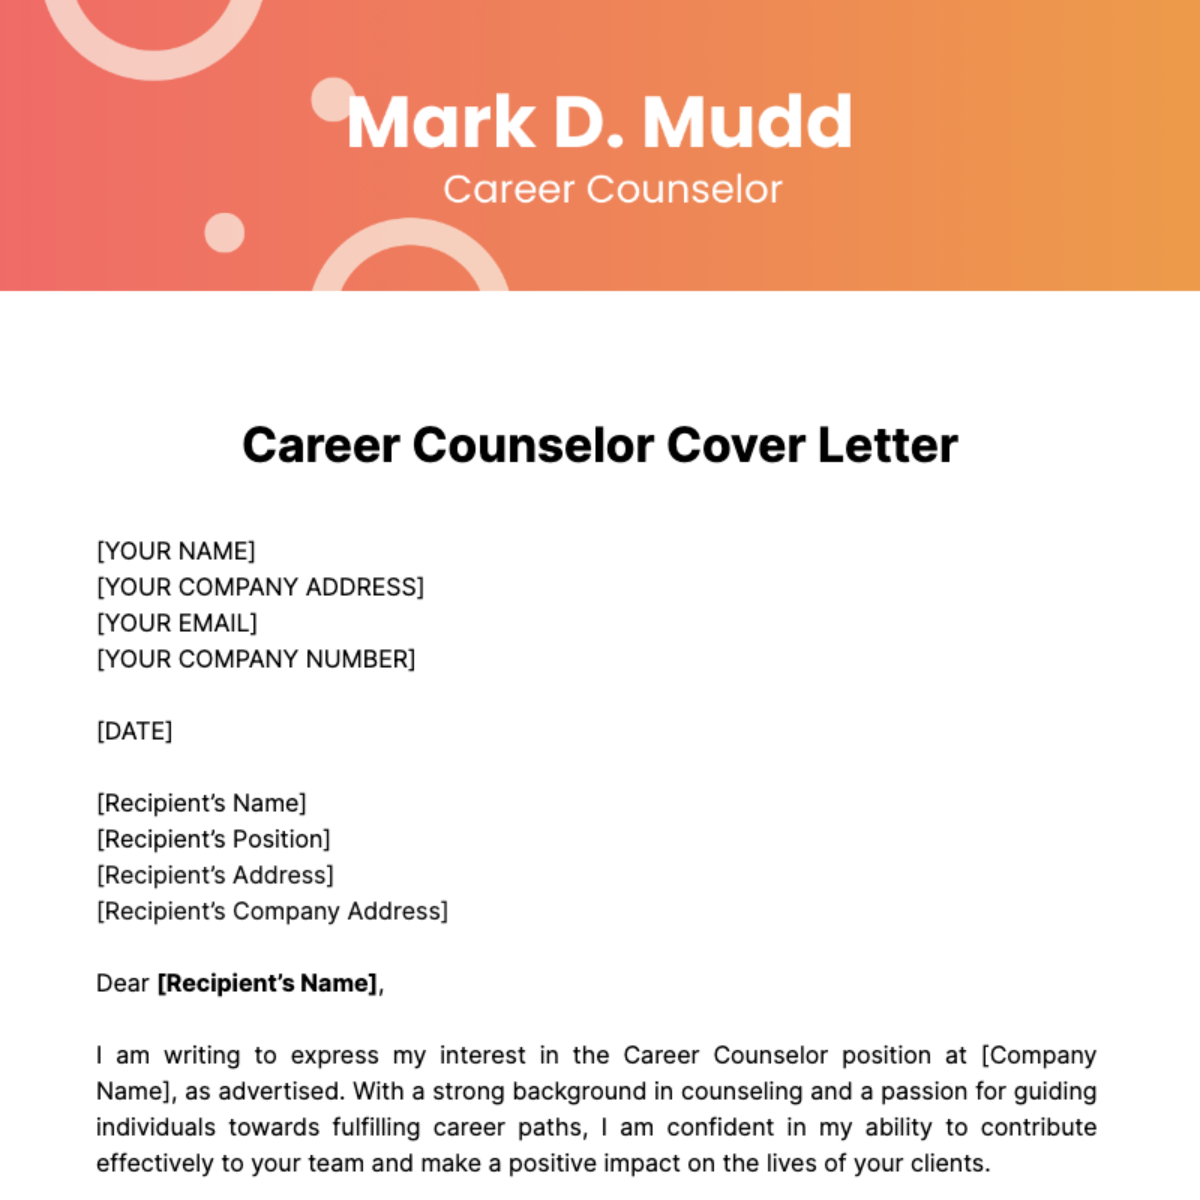 Career Counselor Cover Letter Template